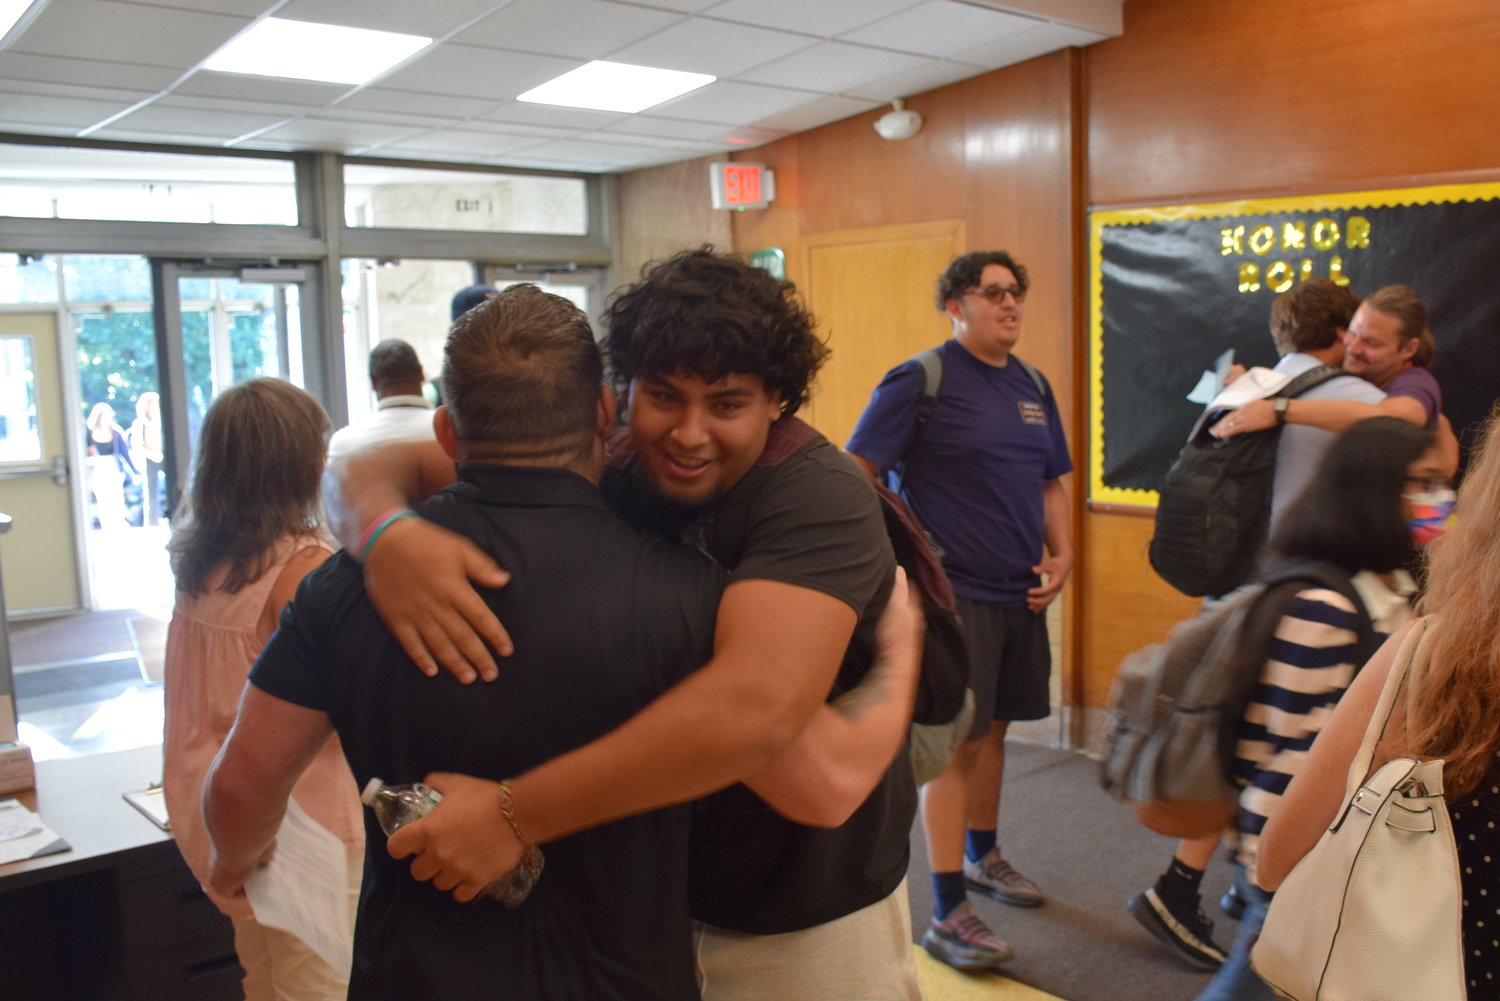 Incoming senior Michael AbiAoun greeted phys. ed. teacher Rob Gewirtz with unbridled enthusiasm on the first day of classes at the new West Hempstead Secondary School on Sept. 1.